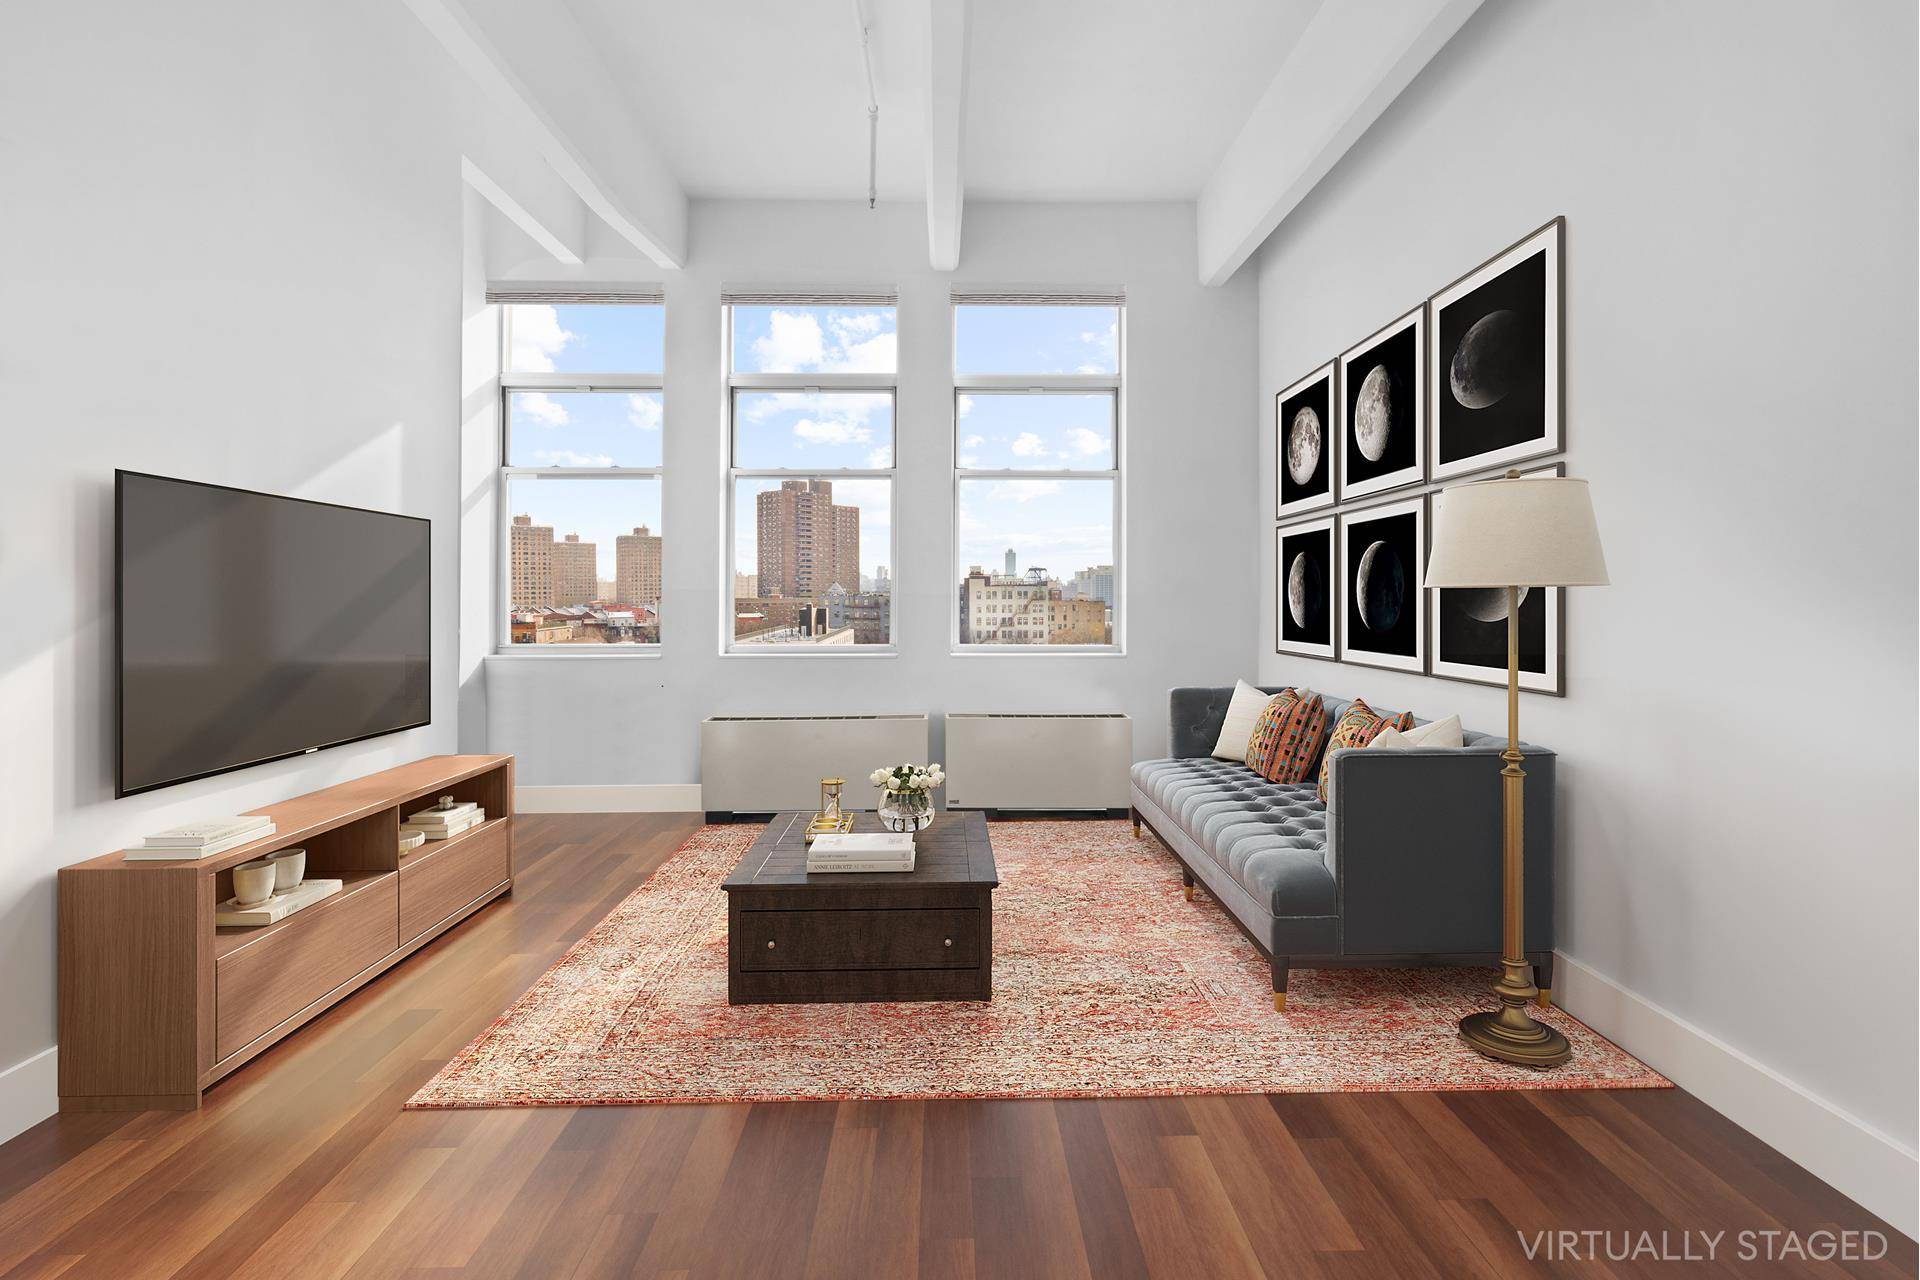 Discover this captivating, sunlit loft nestled within one of Williamsburg's most iconic buildings.